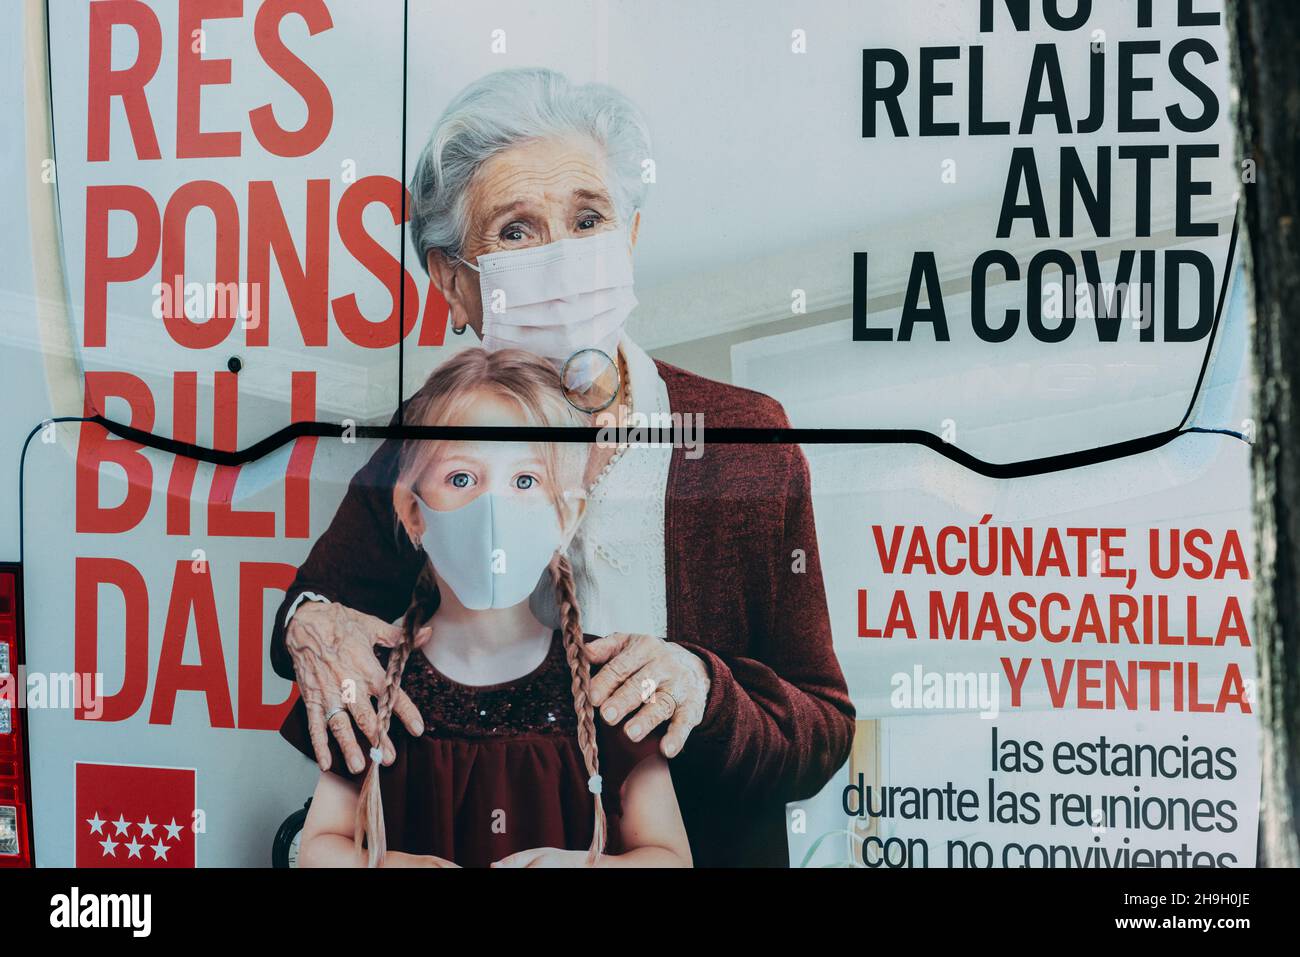 Billboard on the back of a bus in Madrid, Spain depicting a granddaughter and grandmother with a message about k keeping safe during Covid-19 times Stock Photo